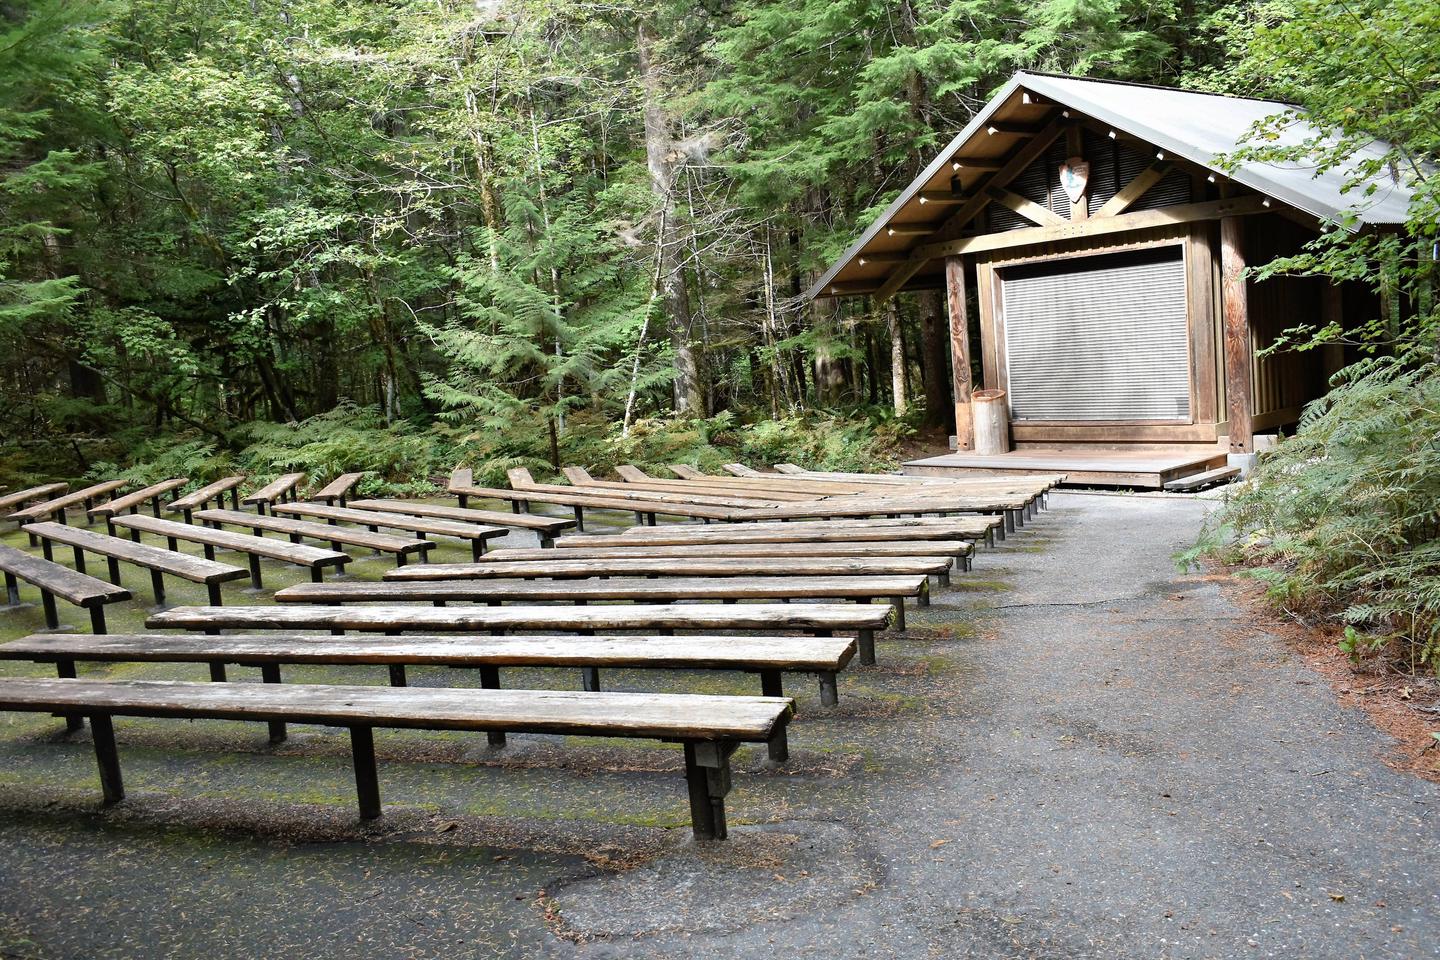 Rustic amphitheater in campground with benches and a building with a stage. Amphitheater located in the campground for ranger programs